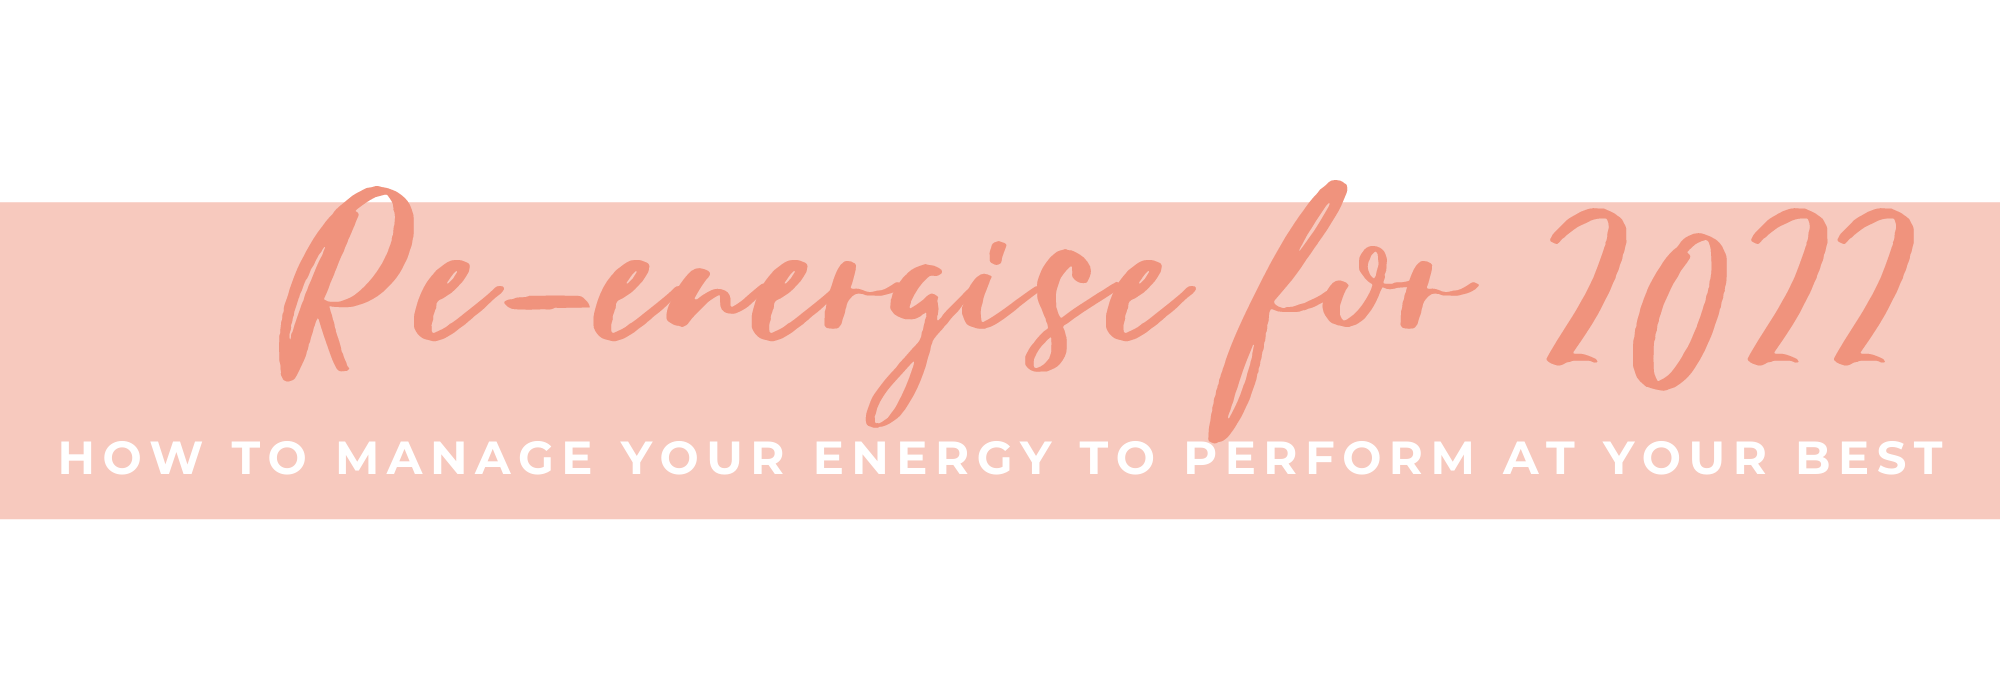 Re-energise for 2022: how to manage your energy to perform at your best